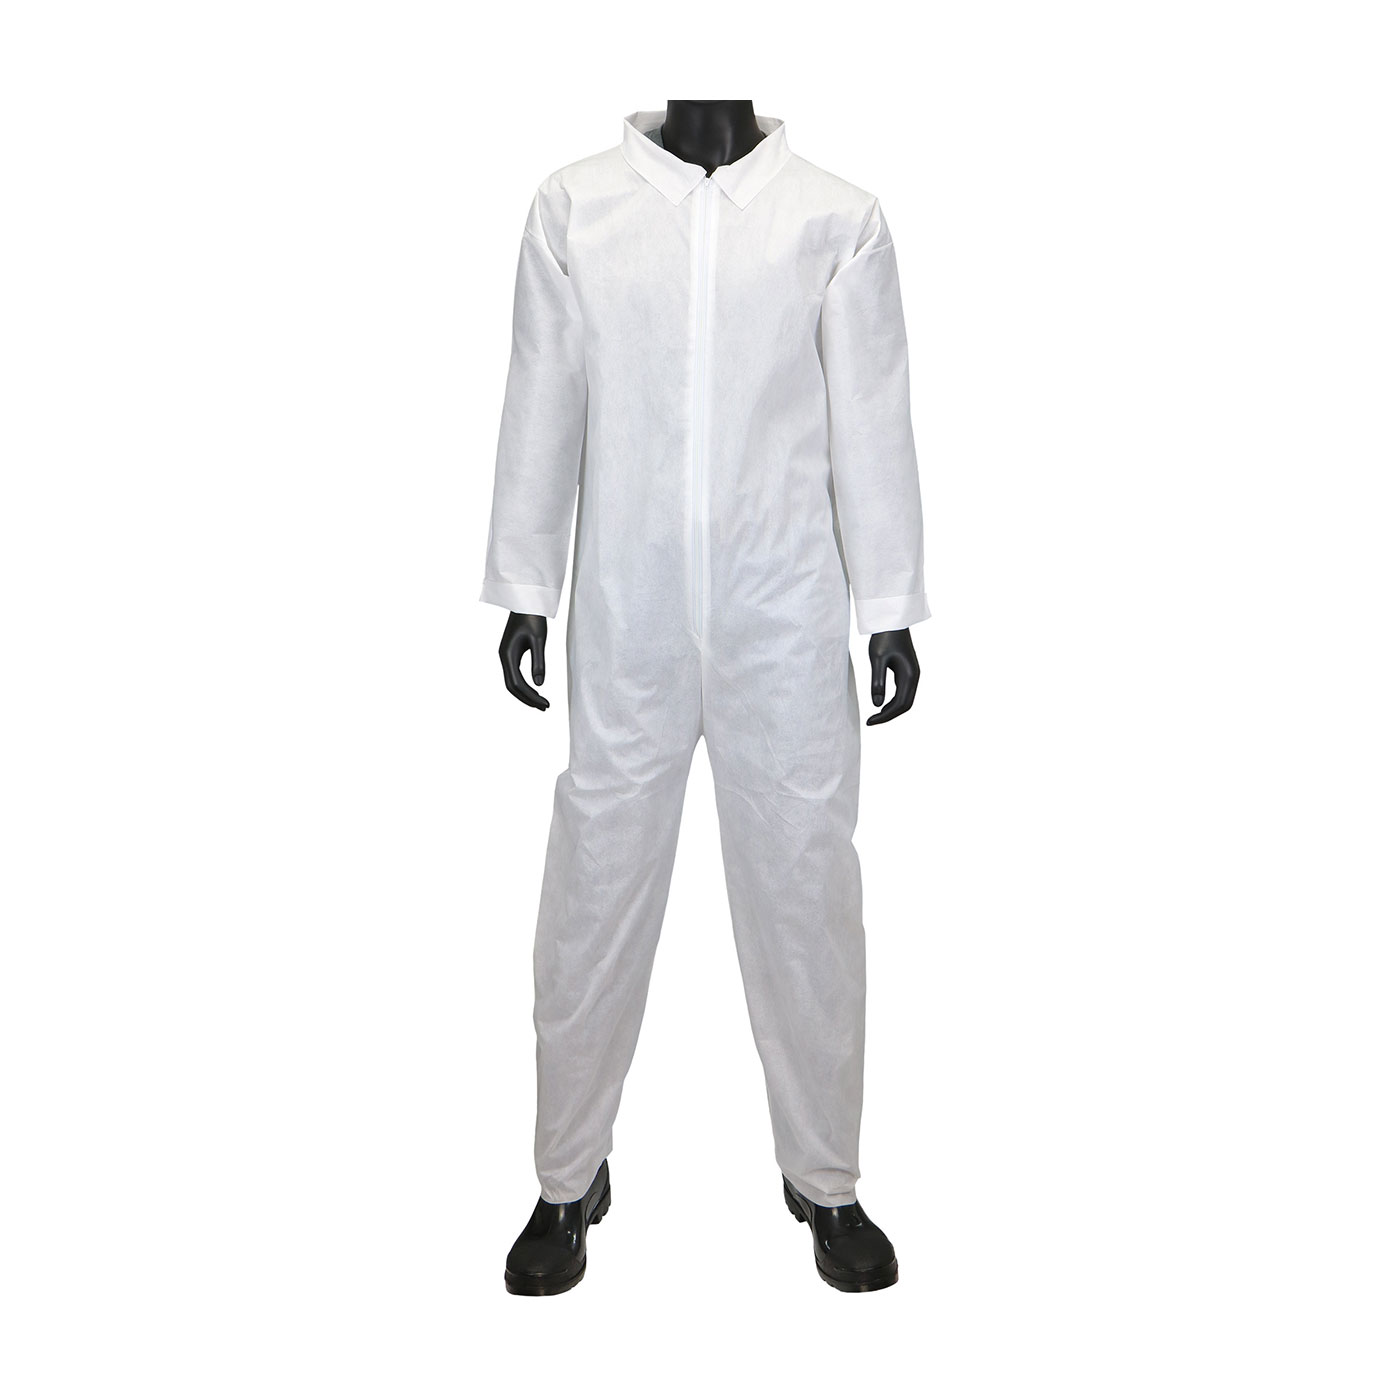 C3850 PIP® West Chester® SMS Basic Coveralls